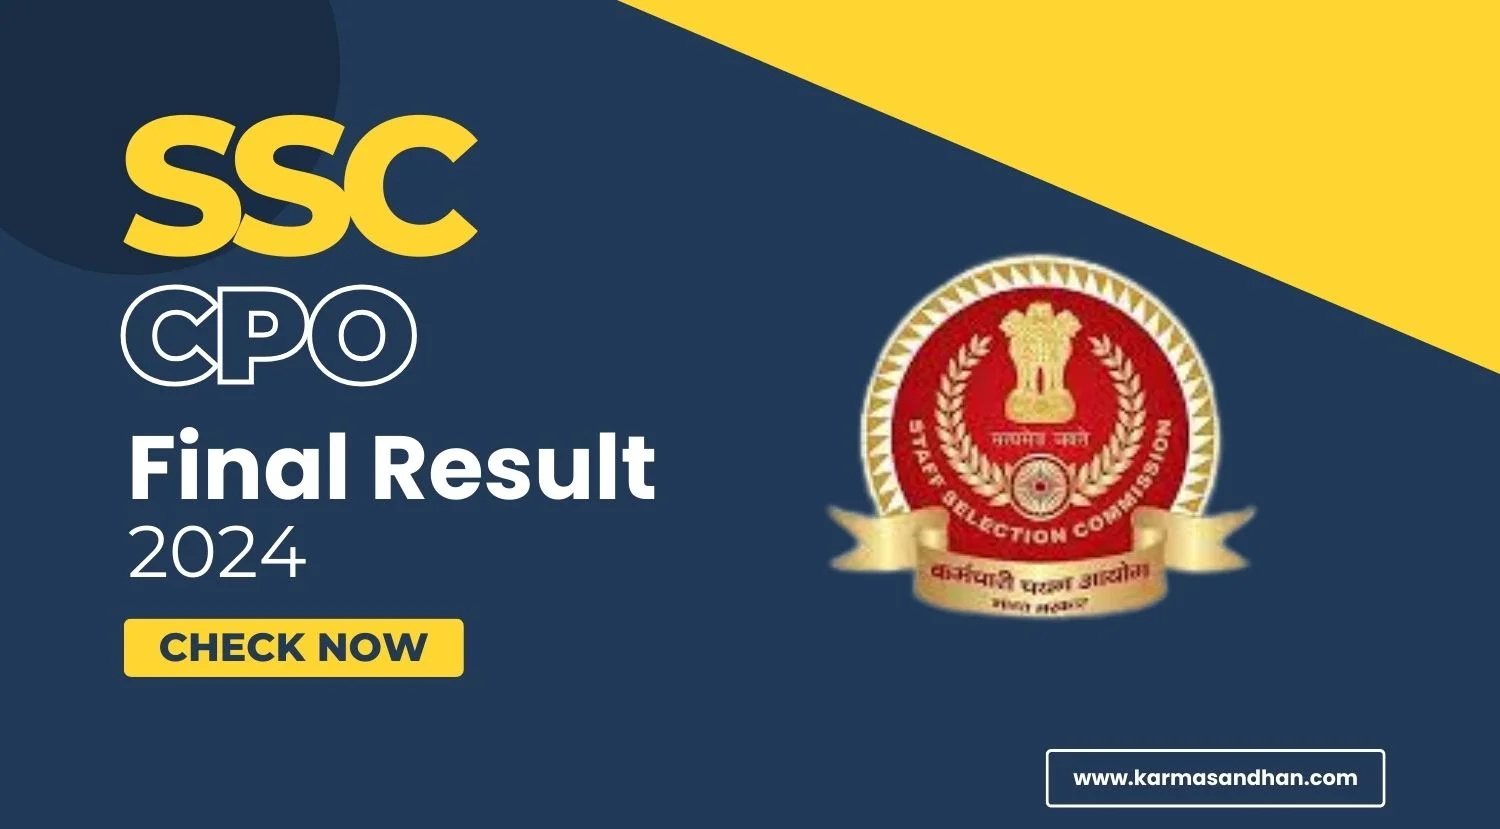 SSC CPO Final Result 2024